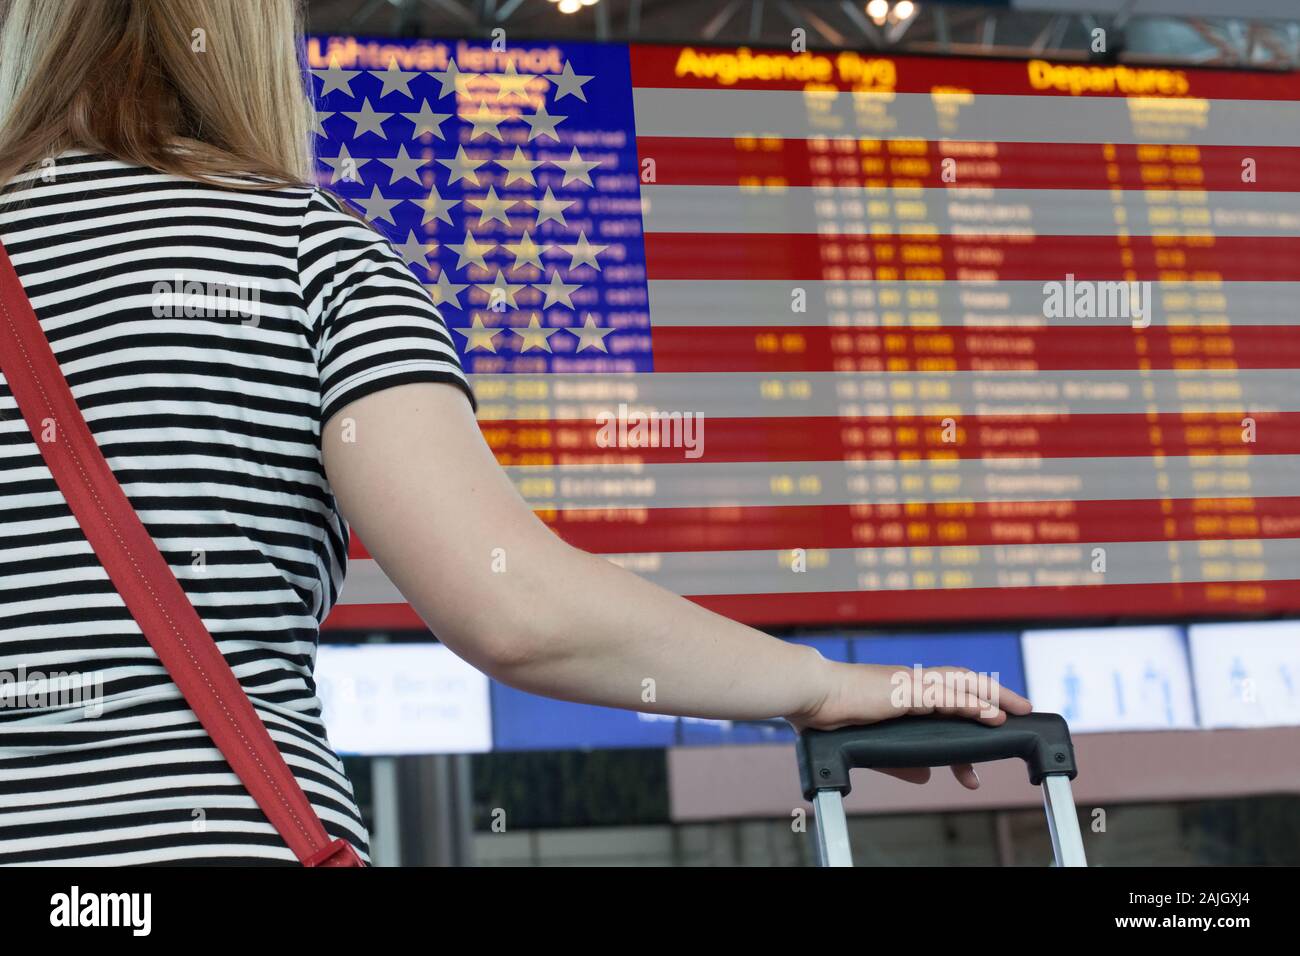 Woman looks at the scoreboard at the airport. Select a country USA for travel or migration. Stock Photo